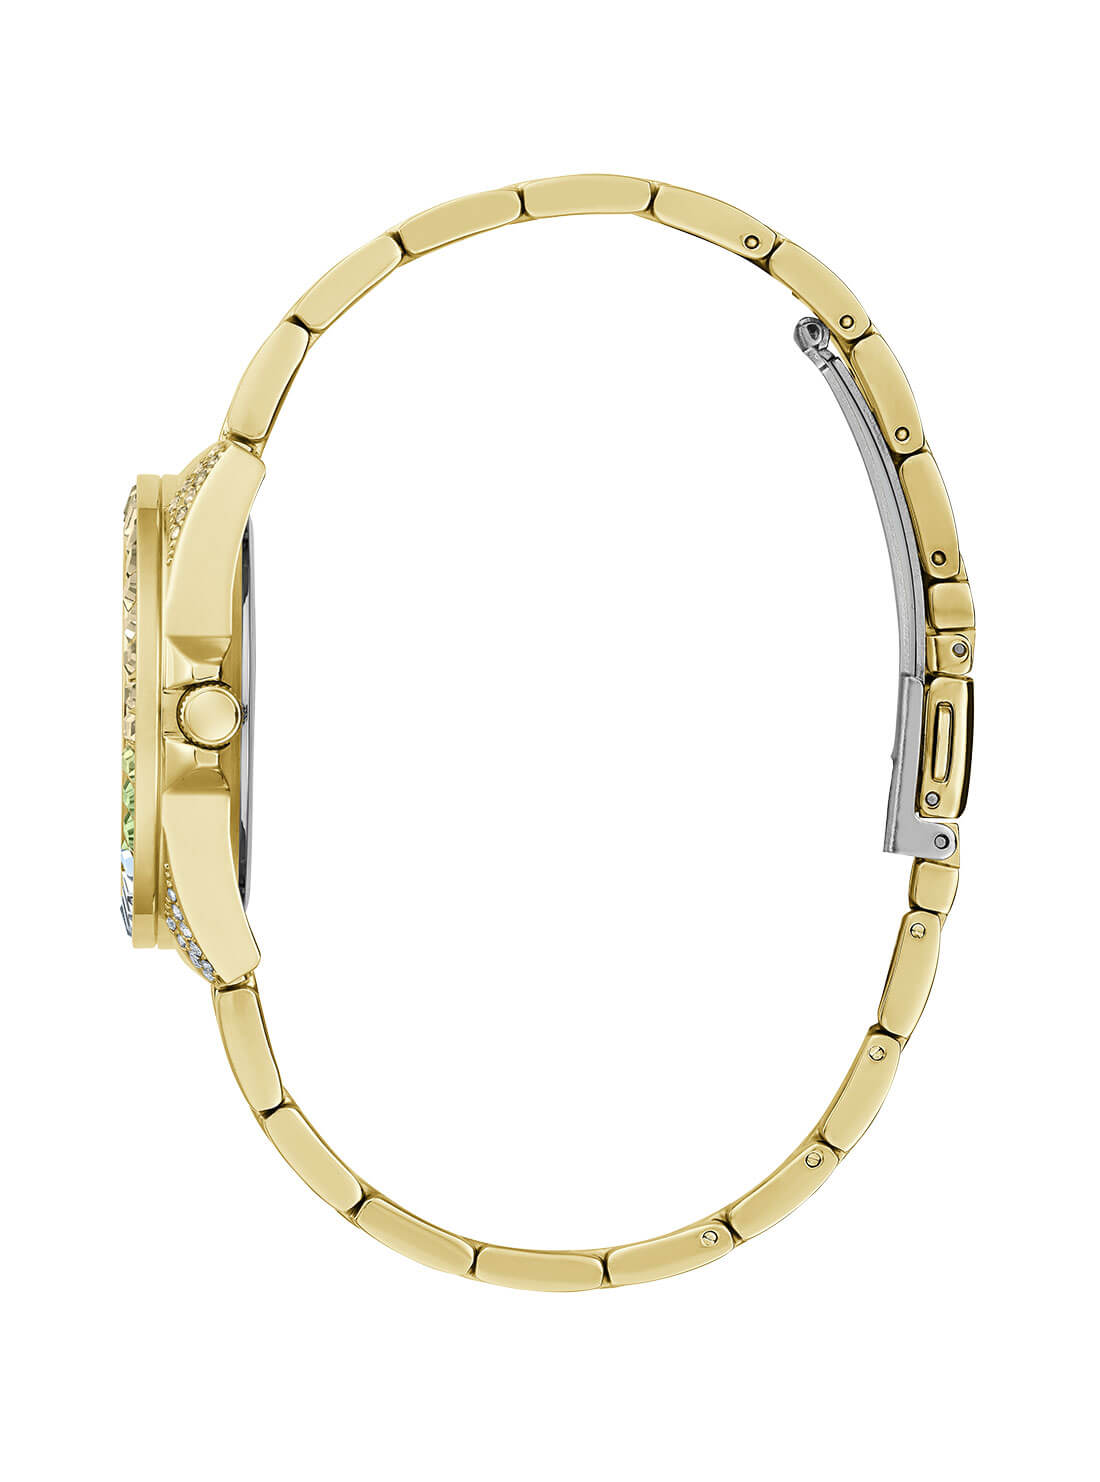 Gold Opaline Multi Crystal Link Watch | GUESS Women's Watches | side view